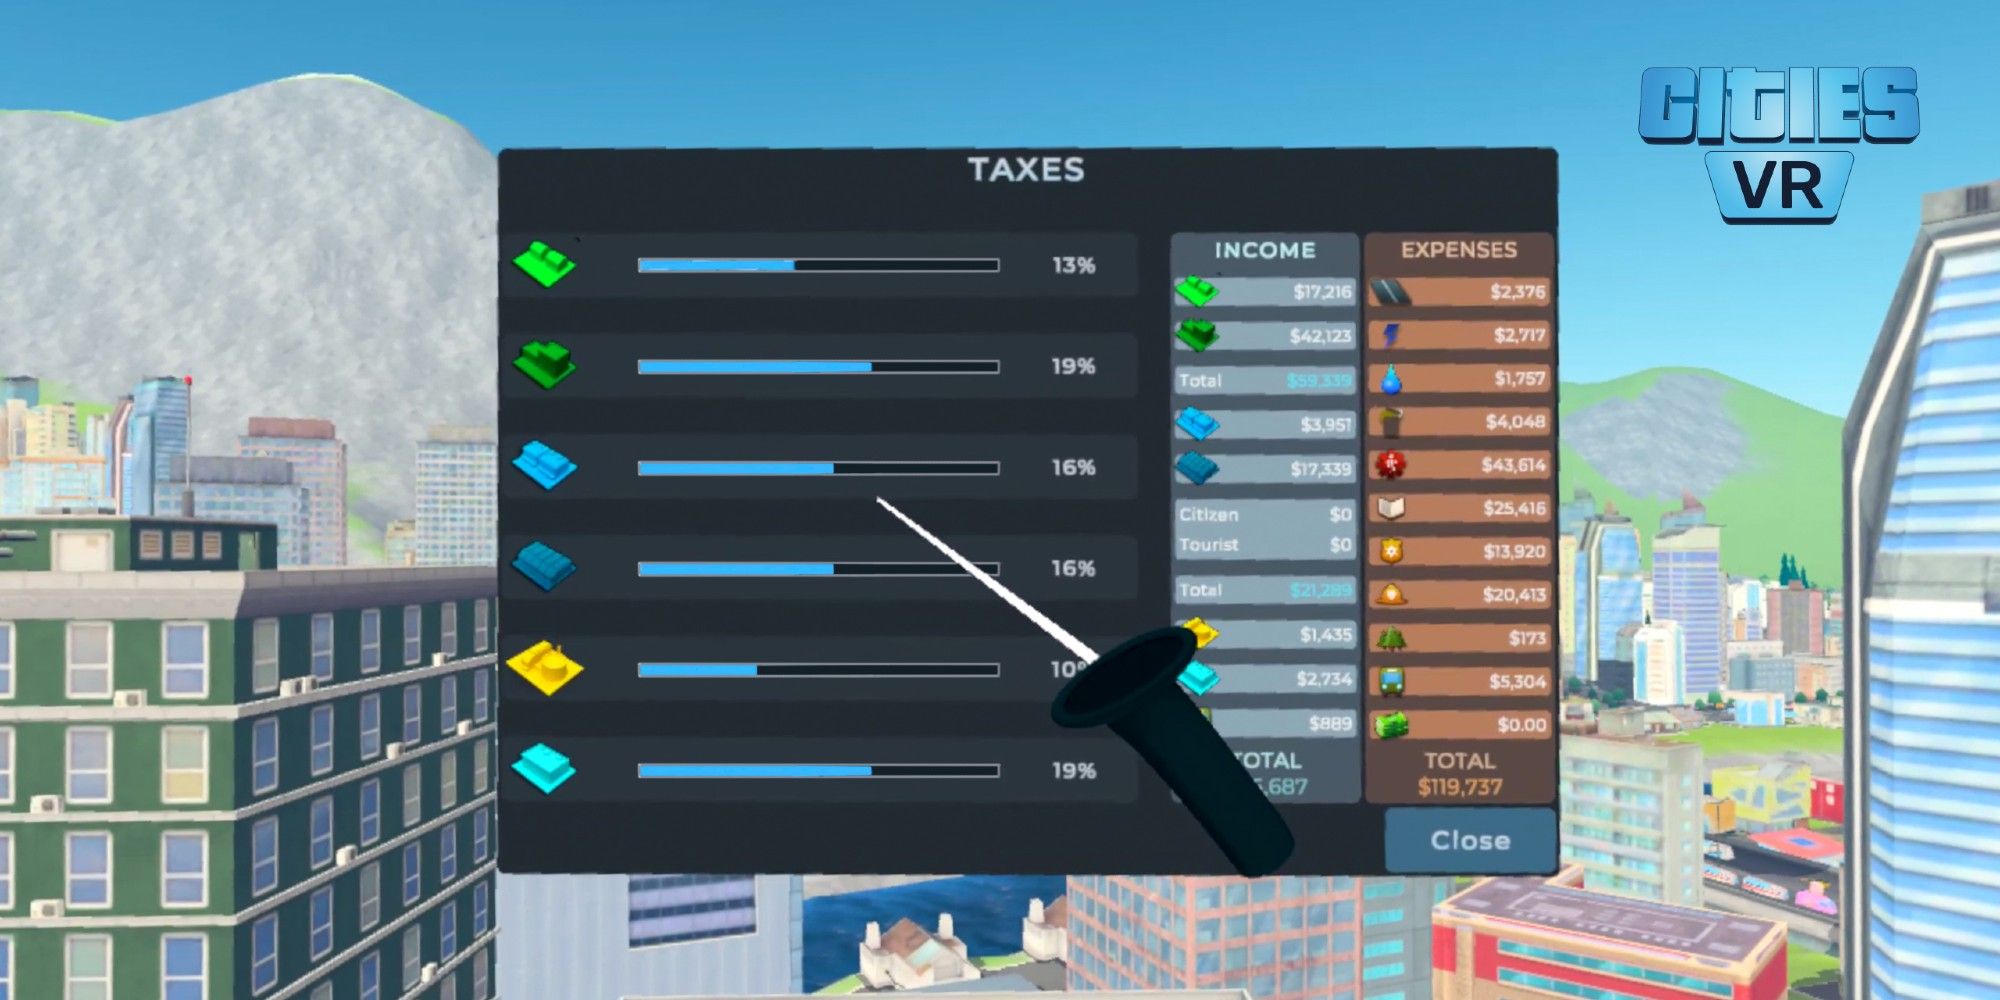 Cities VR settings and ordinances